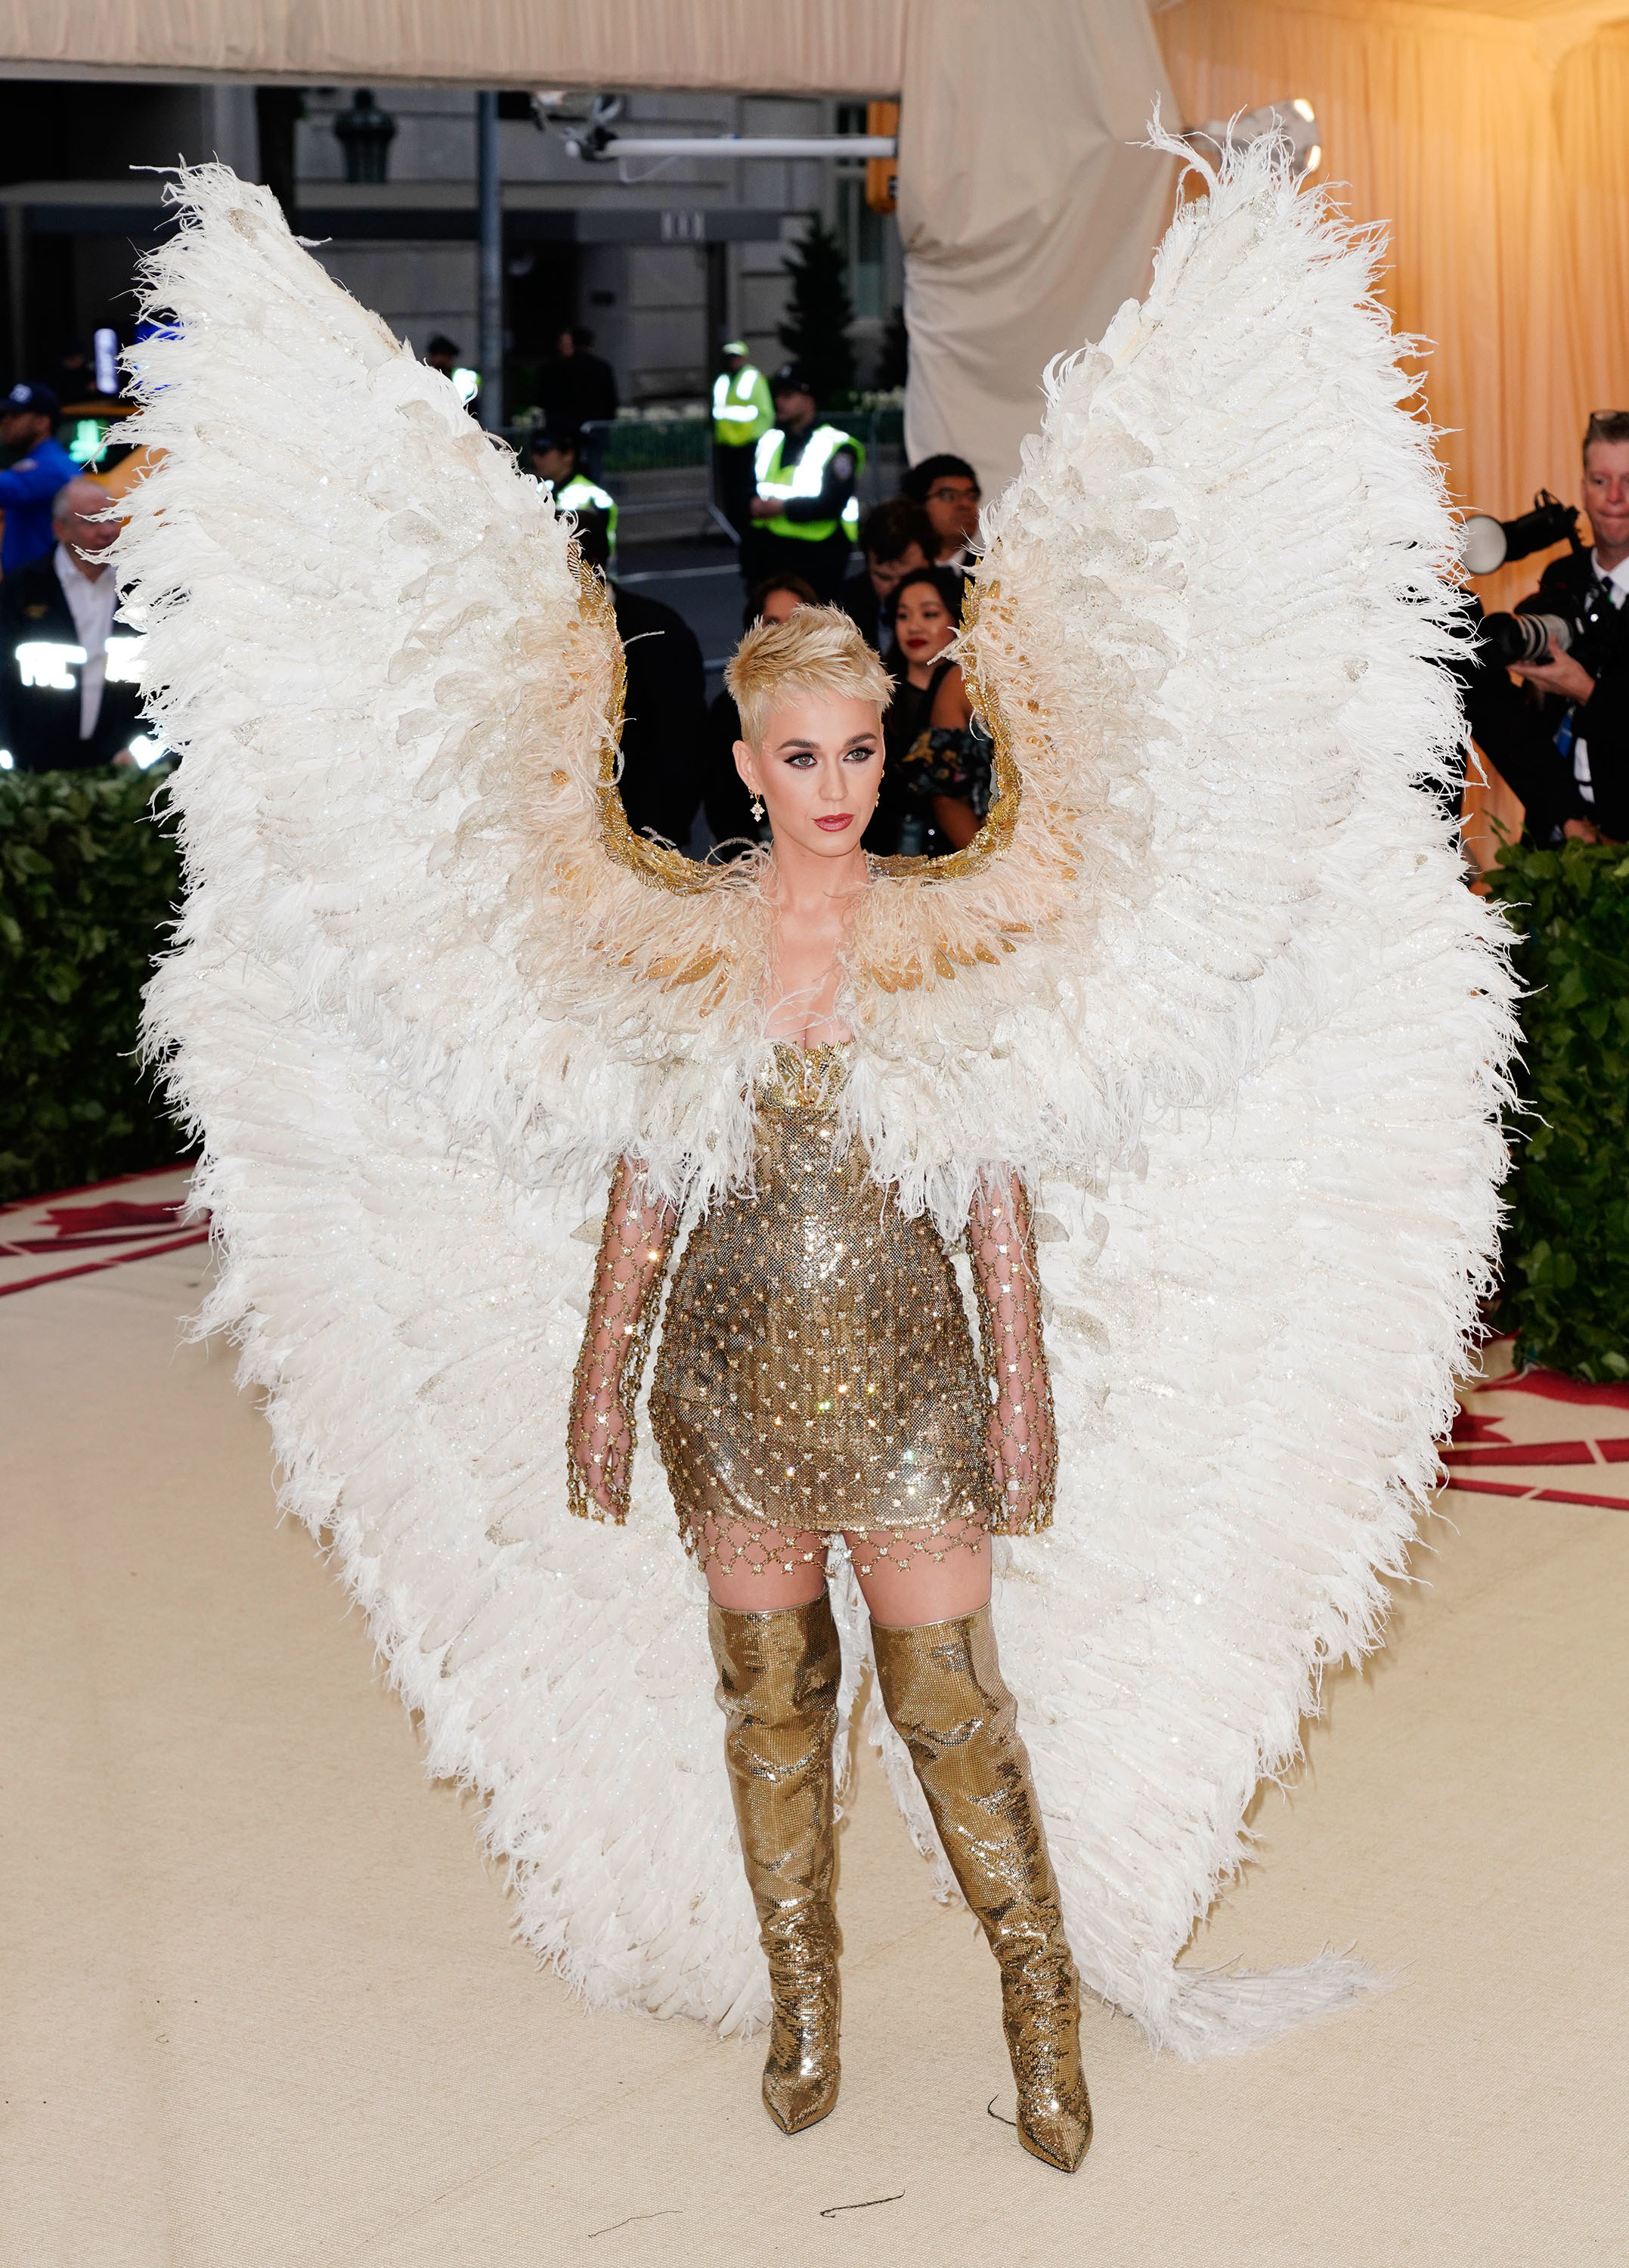 Katy Perry attends Heavenly Bodies: Fashion and the Catholic Imagination Costume Institute Gala at Metropolitan Museum of Art on May 7, 2018, in New York City